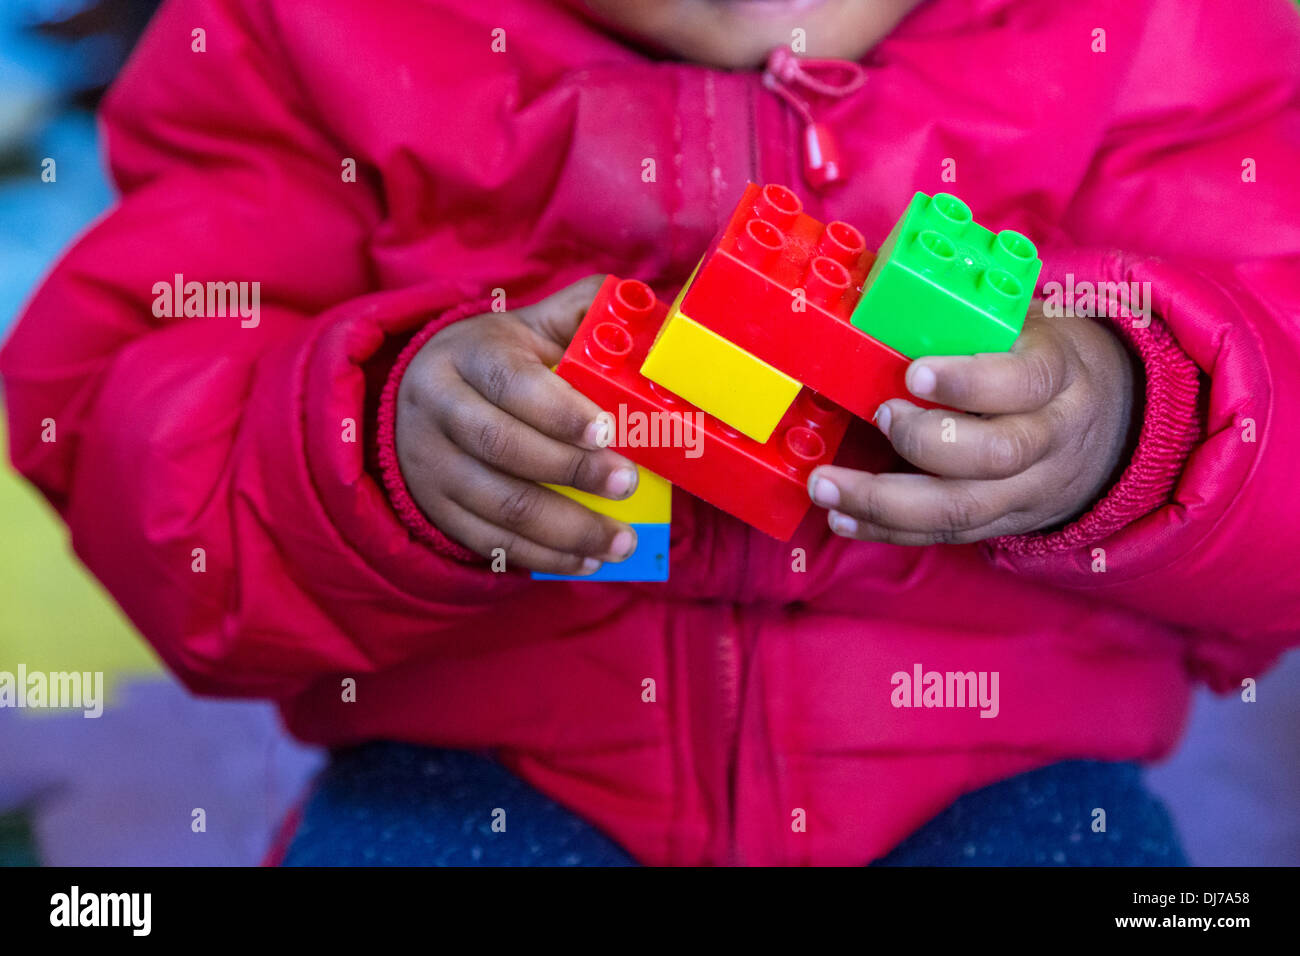 South Africa, Cape Town. Little Child Assembling Plastic Construction Pieces in a Day-care Facility for Young Children. Stock Photo